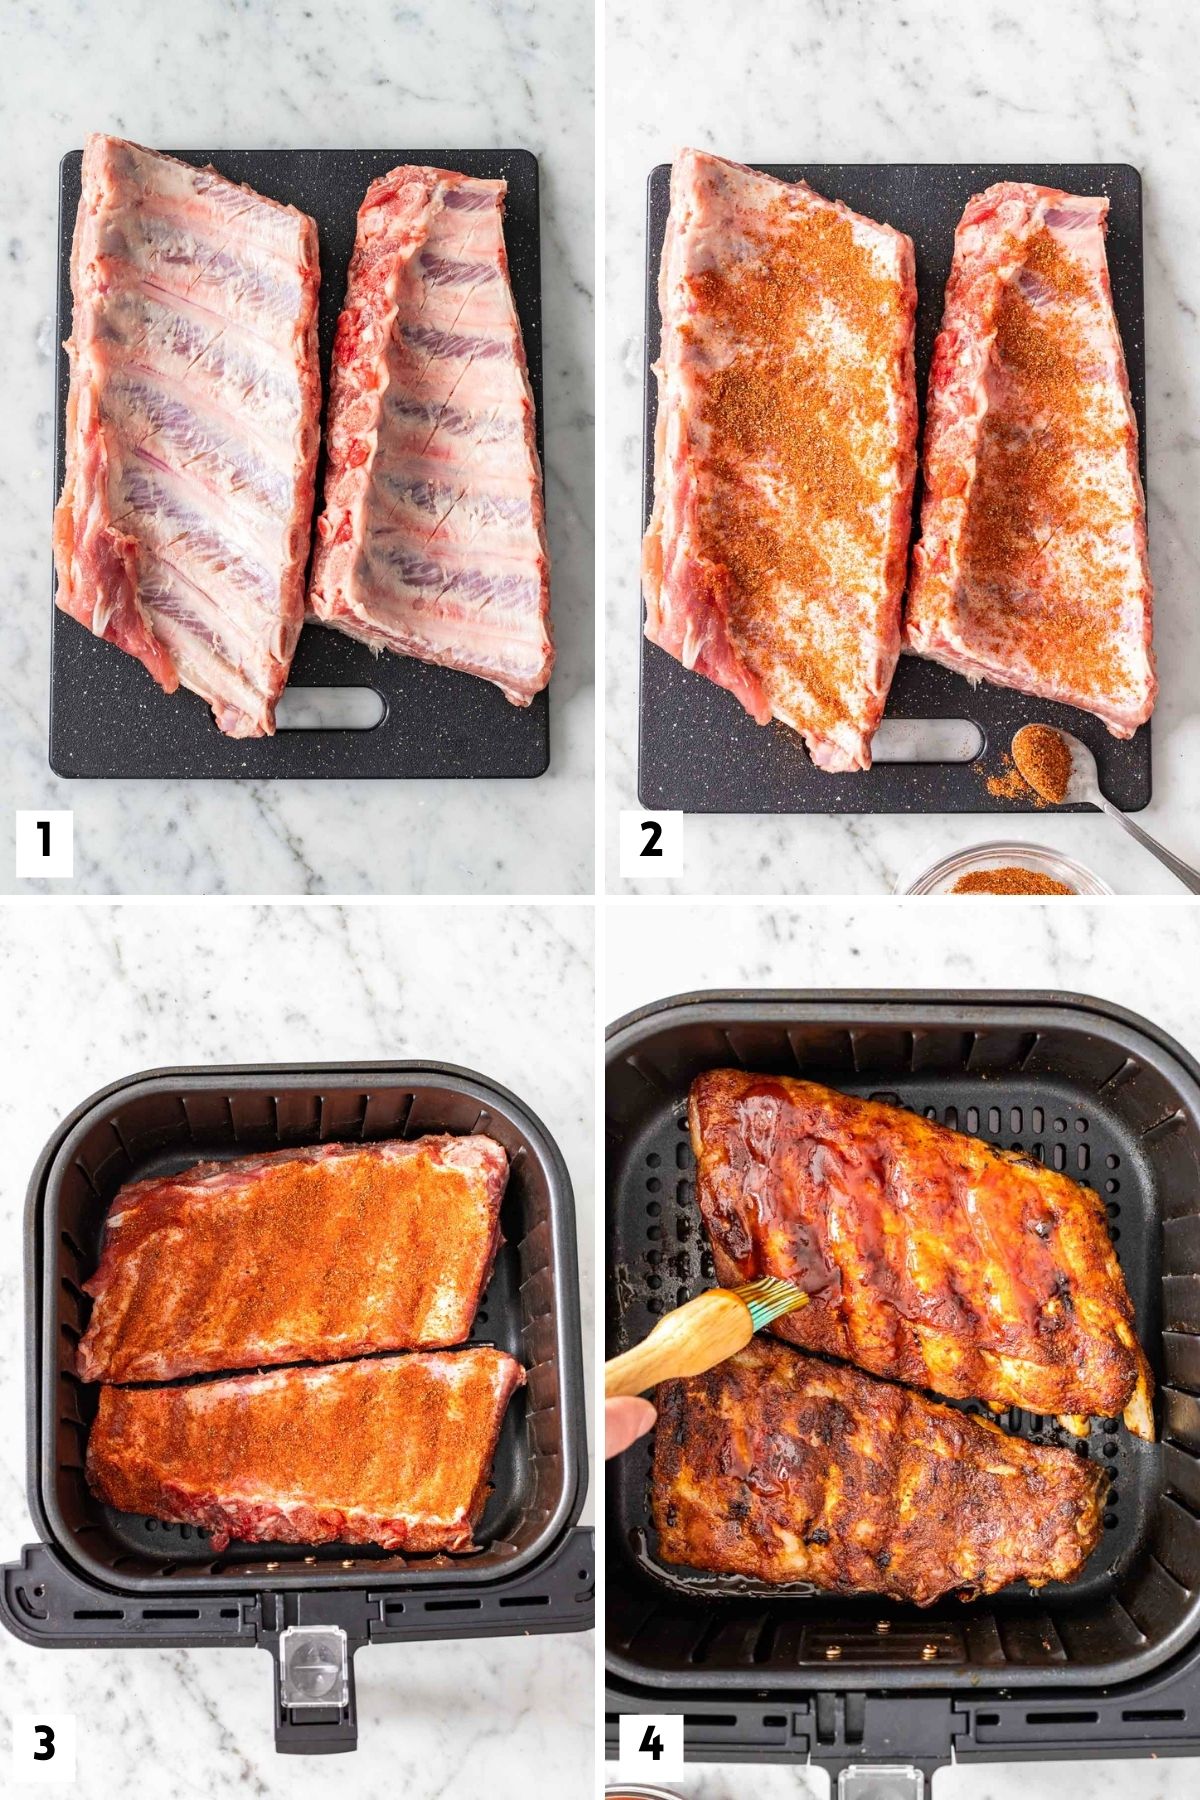 Steps for making ribs in an air fryer